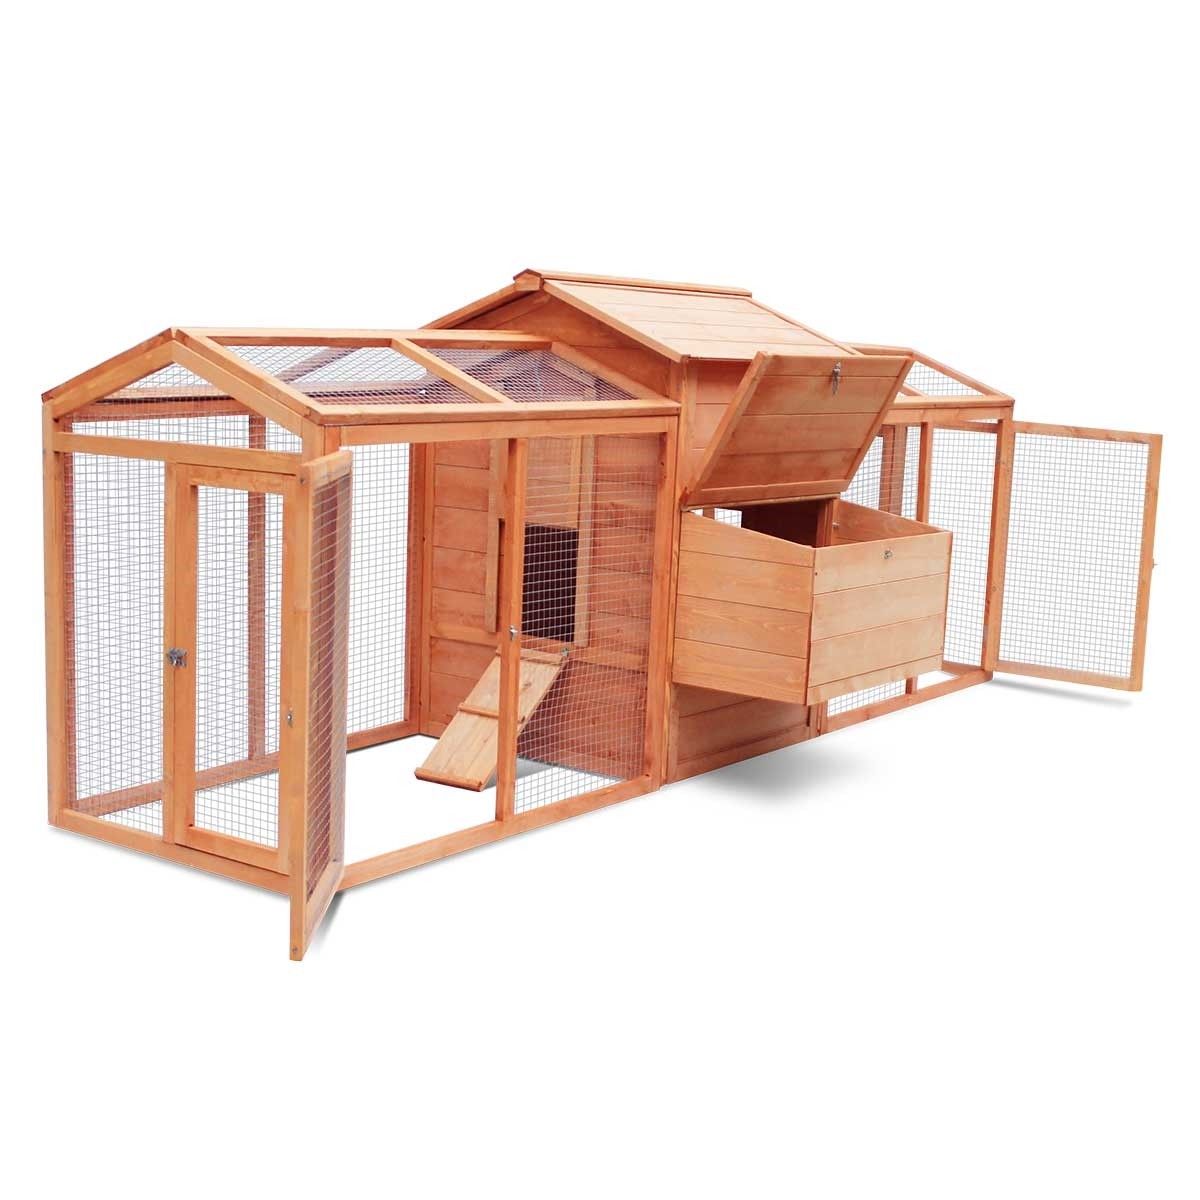 Petscene 284cm Wood Chicken Rabbit Coop Hen House Hutch Poultry Cage 